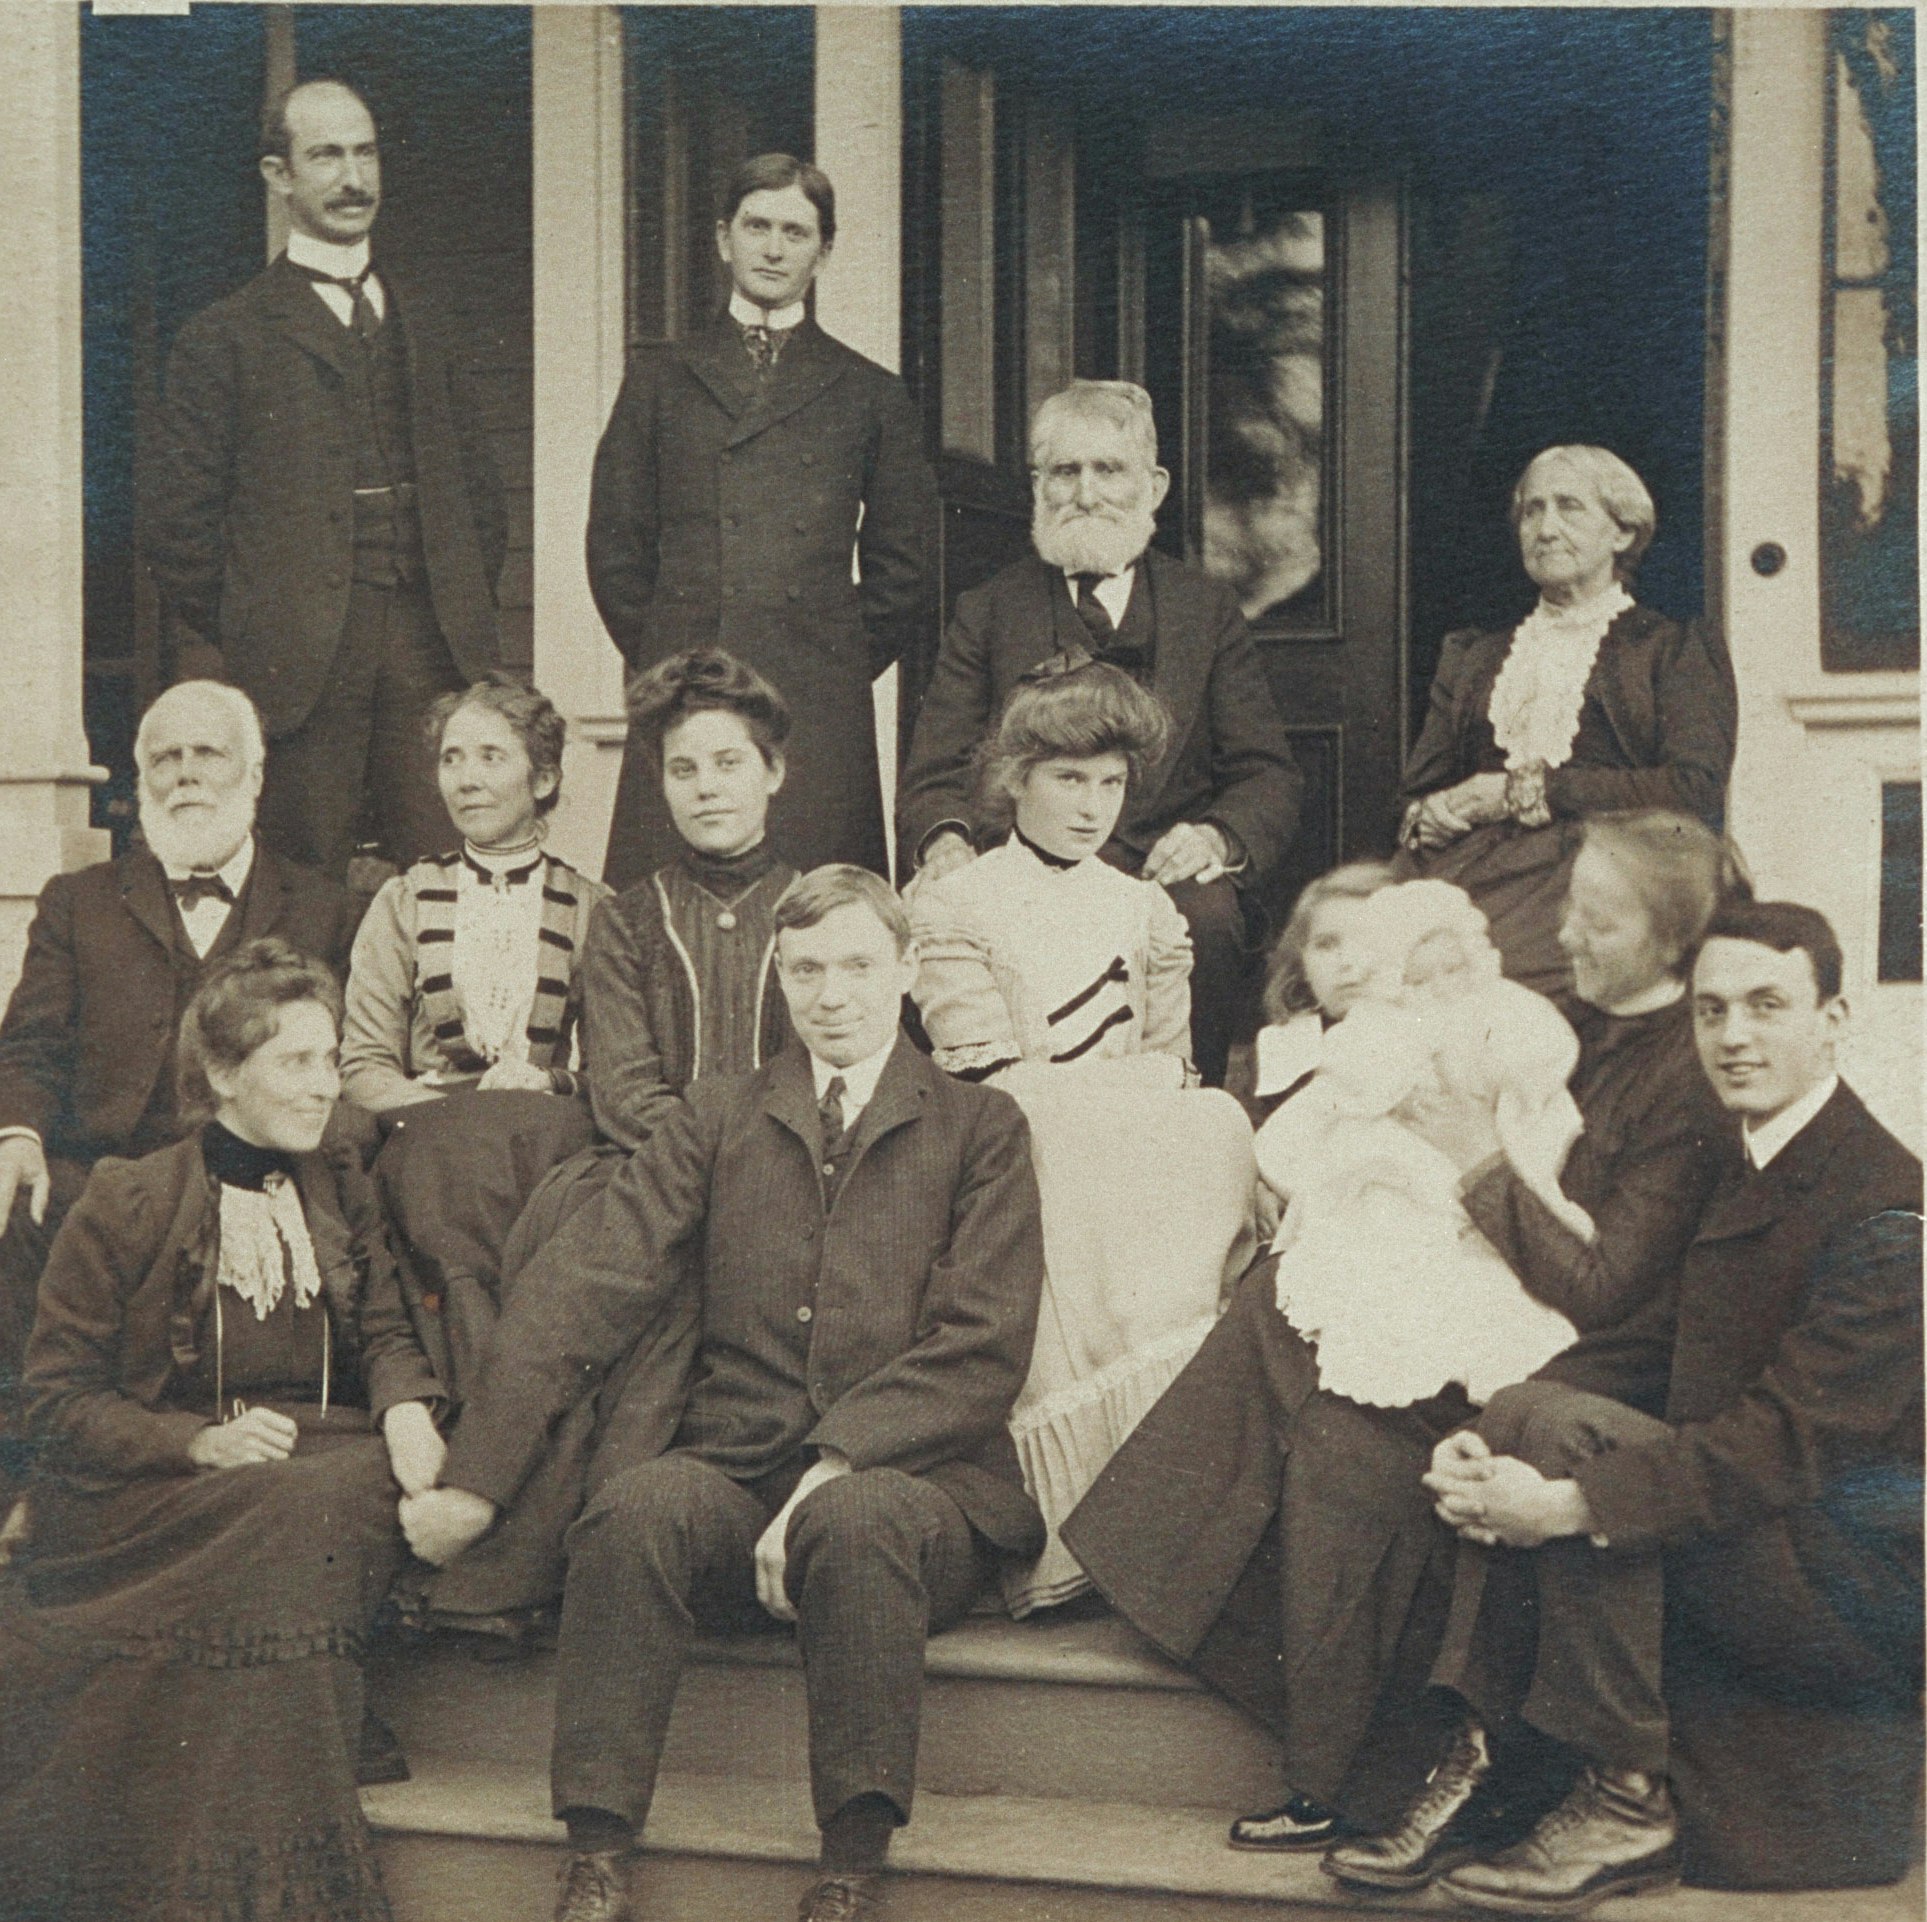 Group portrait of members of the Blackwell family on a dwelling porch